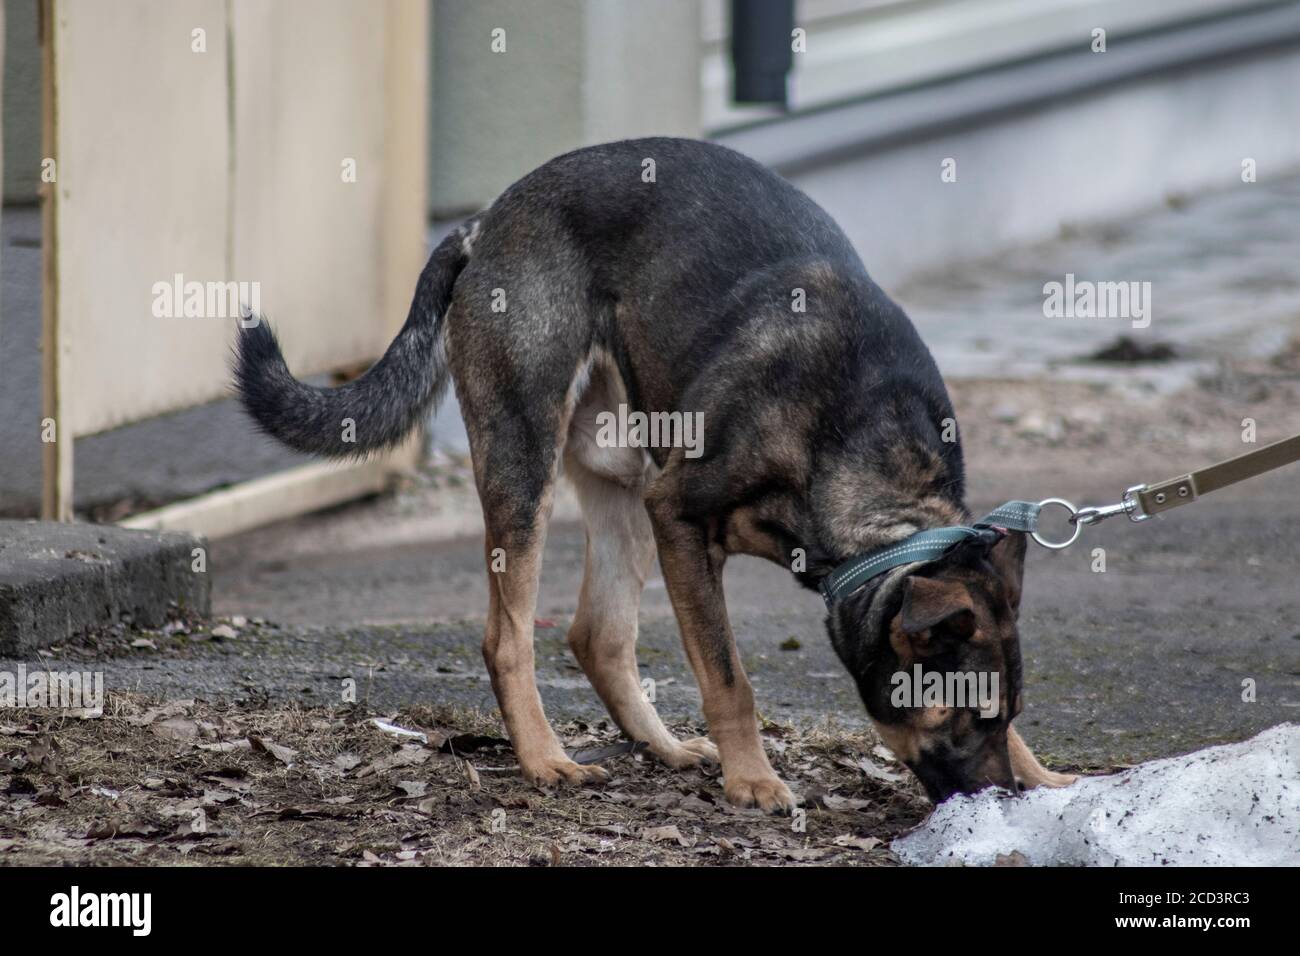 Large dog with brown fur sniffing for something on the ground Stock Photo